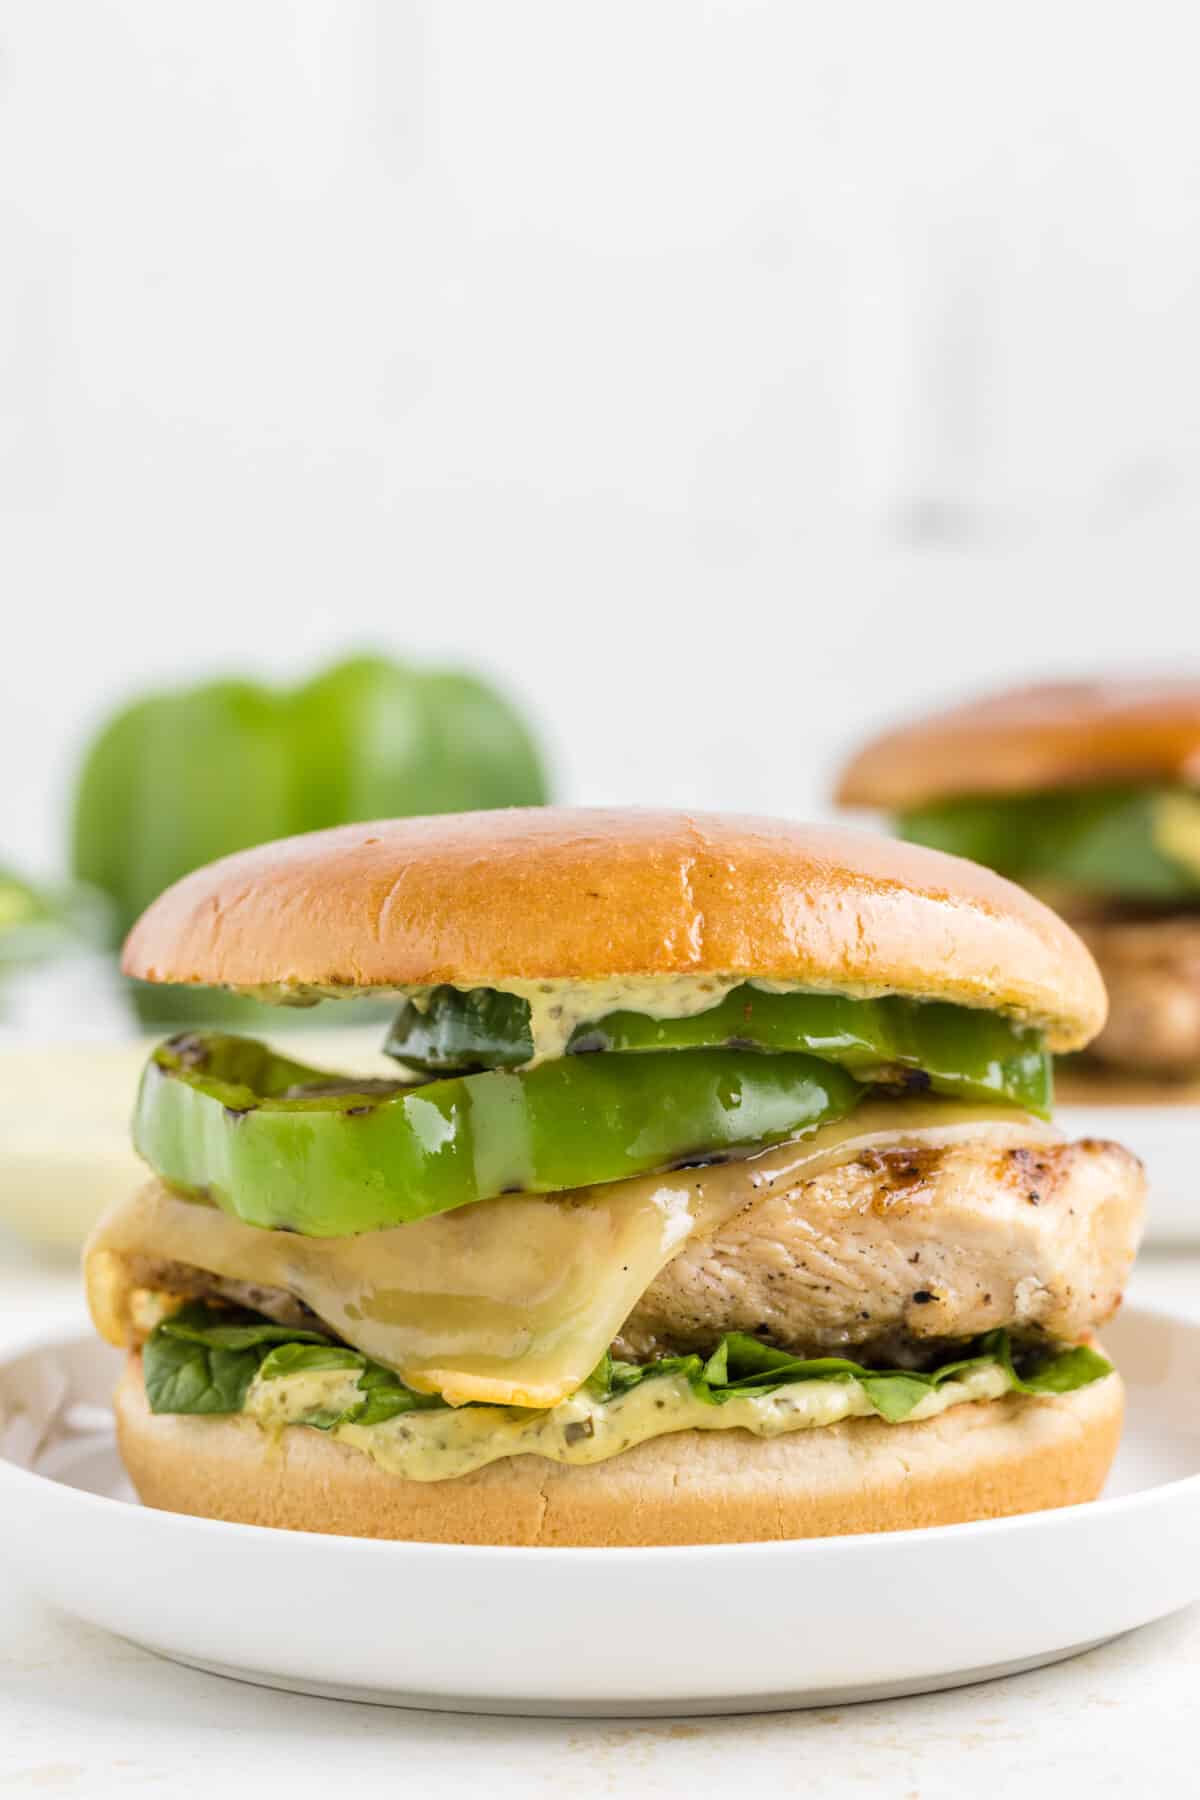 finished grilled chicken sandwich with grilled bell pepper and basil pesto mayo over a toasted bun.